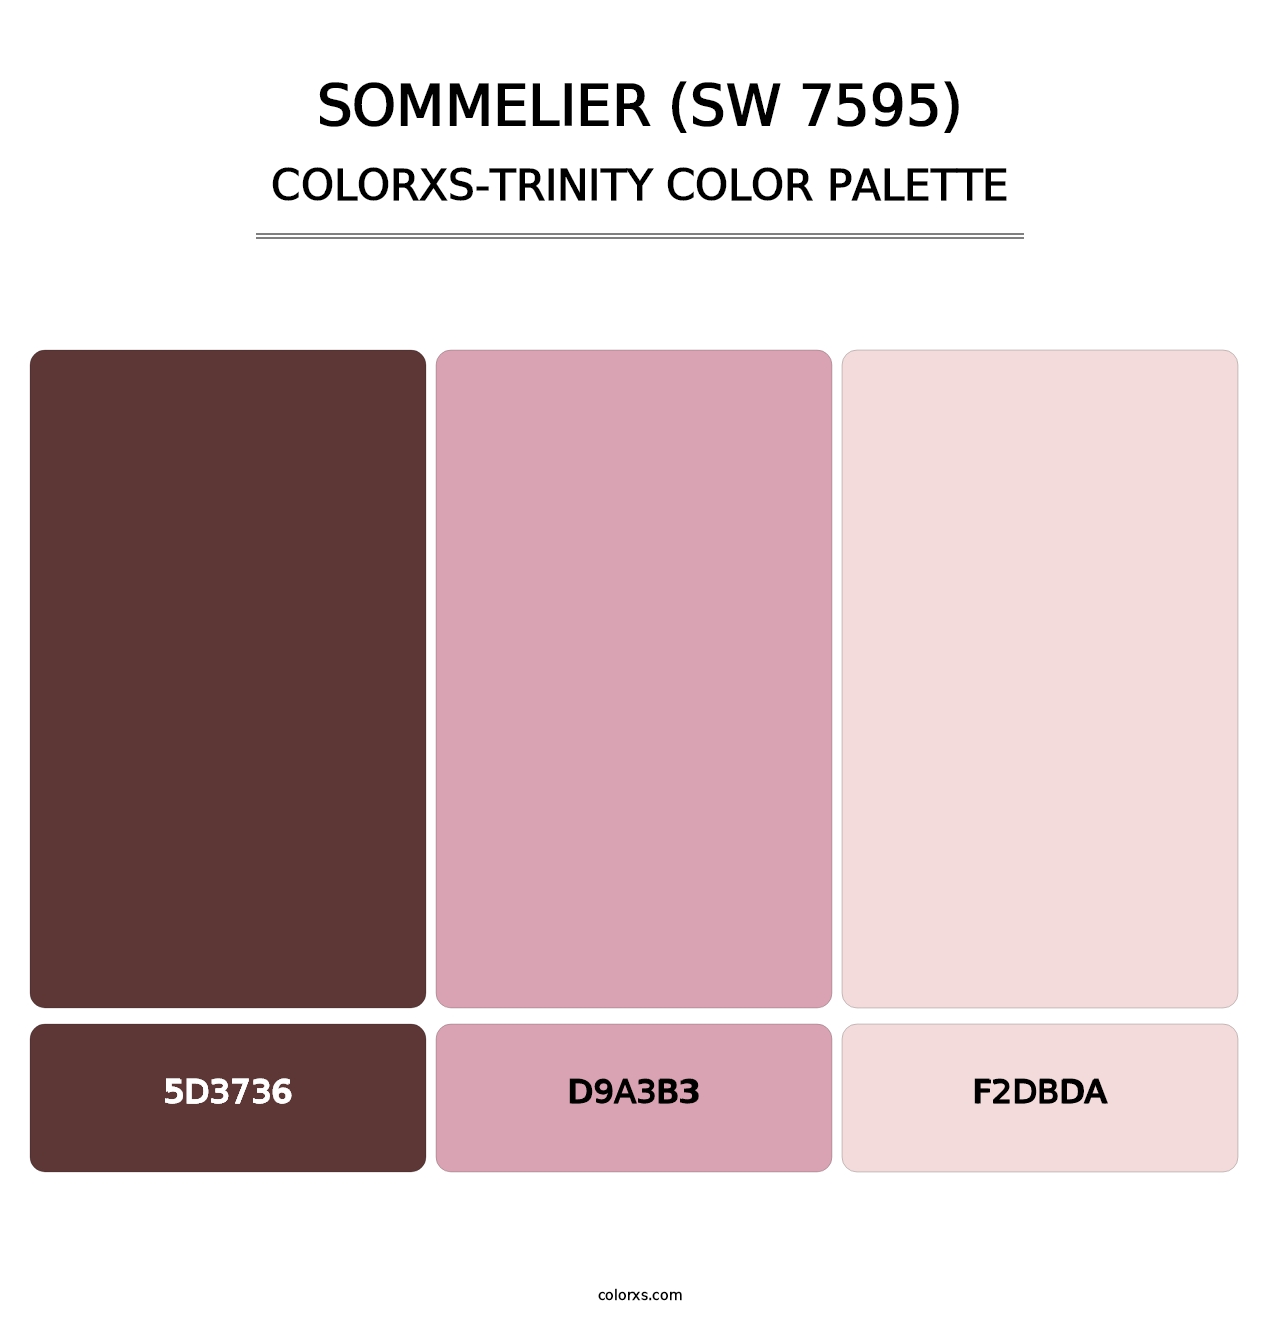 Sommelier (SW 7595) - Colorxs Trinity Palette